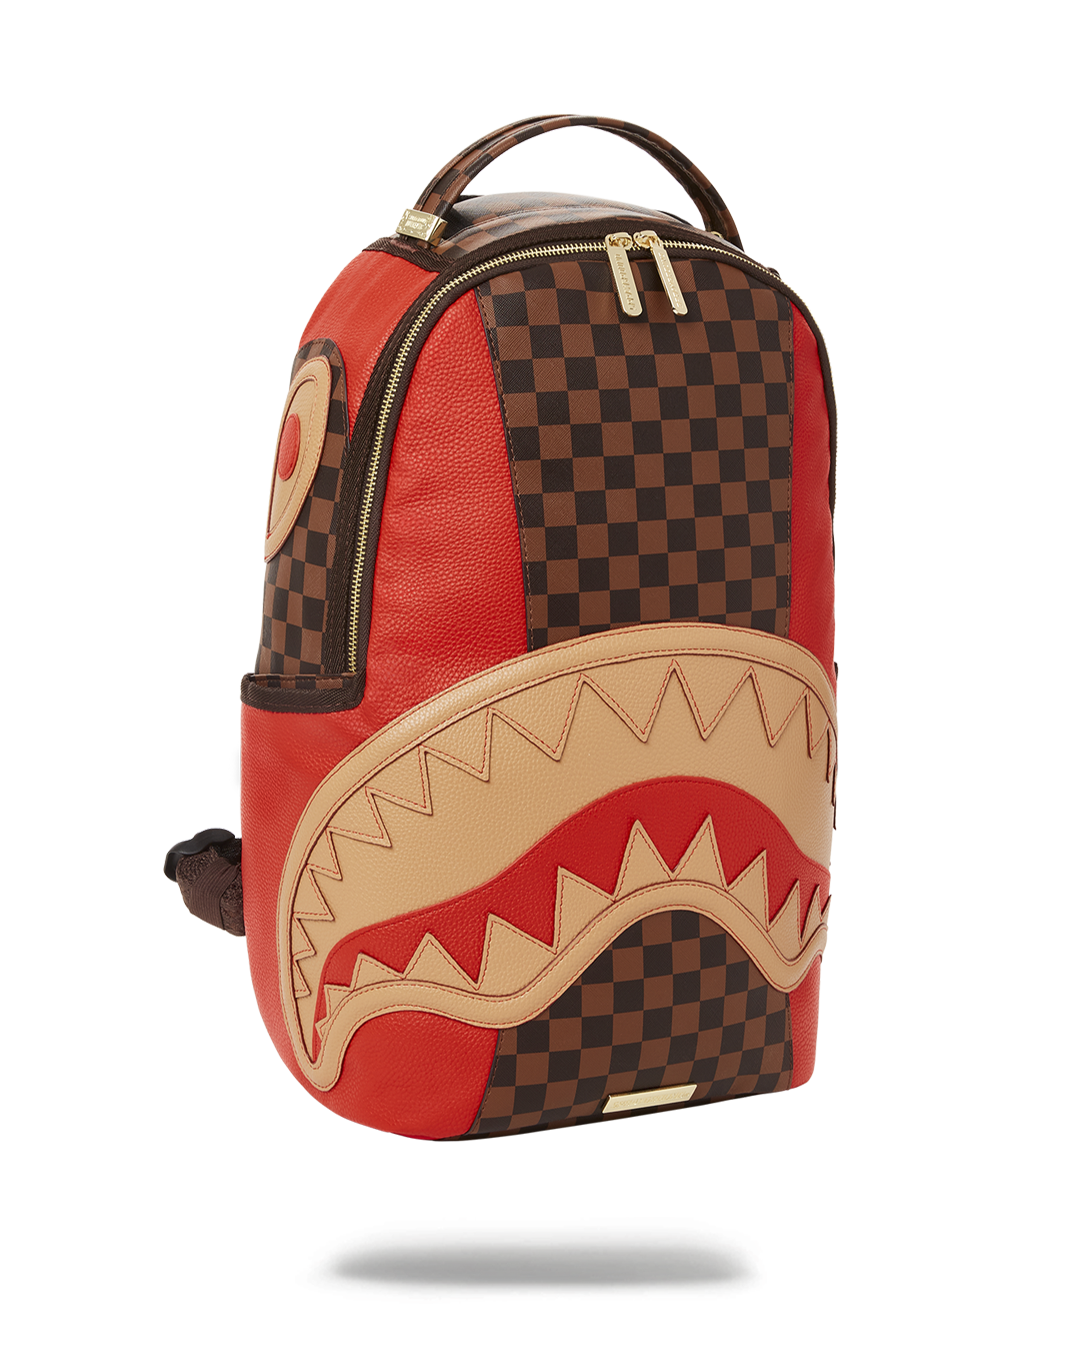 SPRAYGROUND RACEWAY HENNY WING BACKPACK (DLXV) - Limited Edition